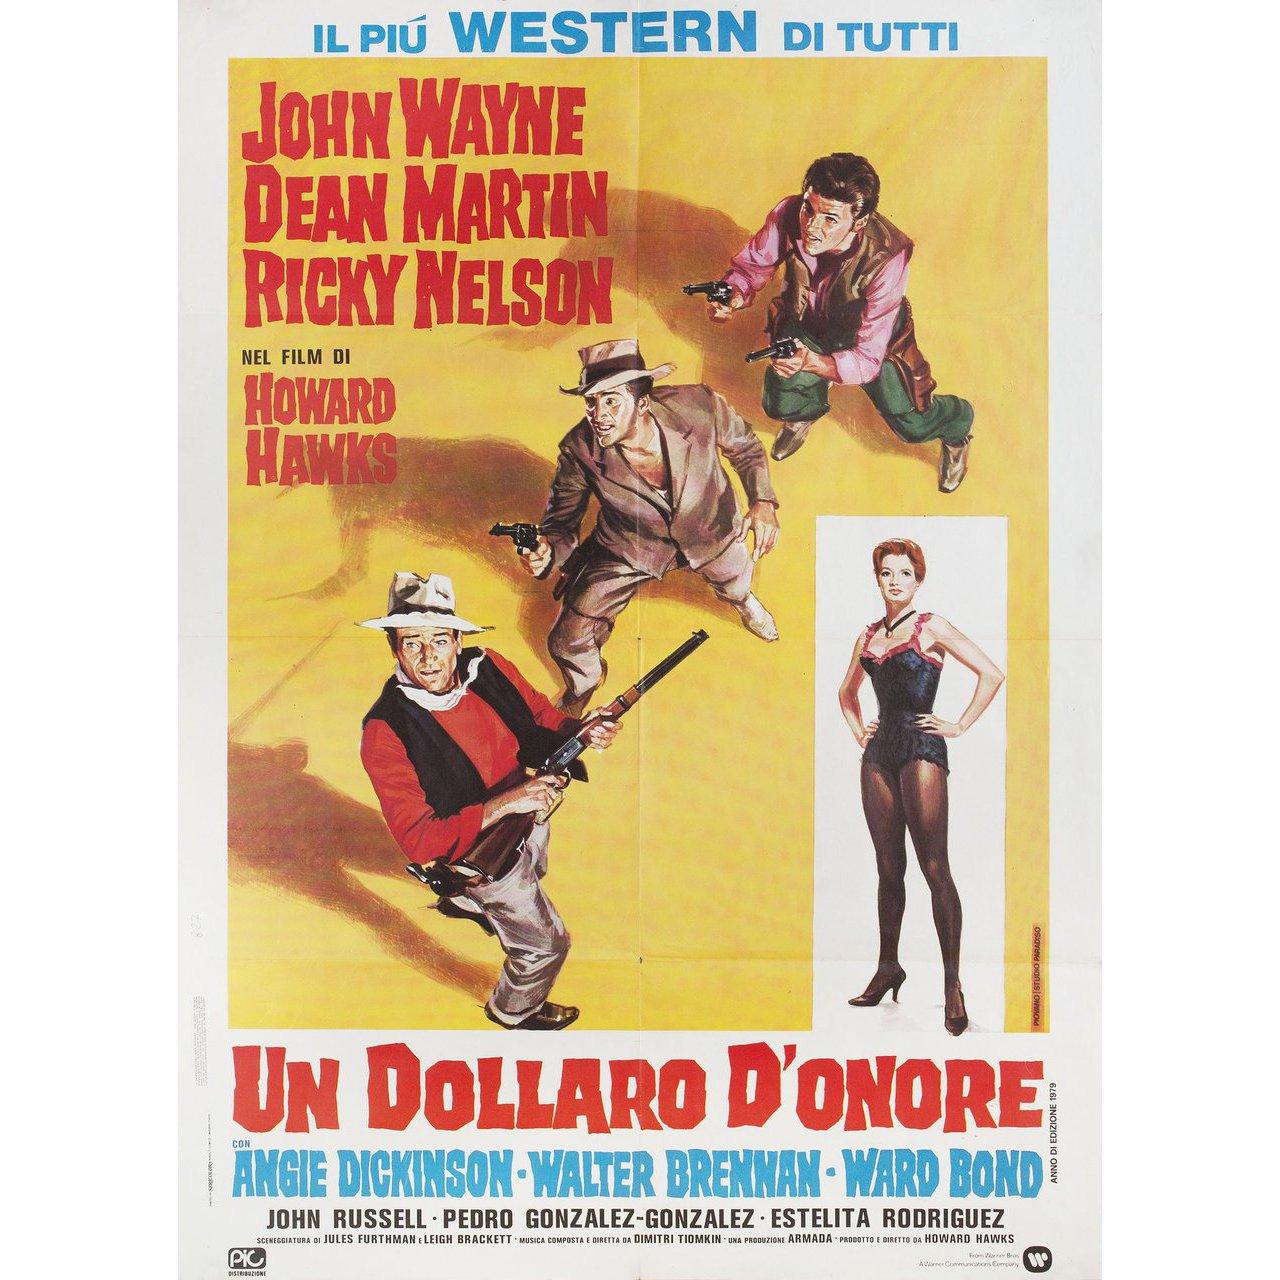 Original 1978 re-release Italian due fogli poster for the 1959 film Rio Bravo directed by Howard Hawks with John Wayne / Dean Martin / Ricky Nelson / Angie Dickinson. Very Good-Fine condition, folded. Many original posters were issued folded or were